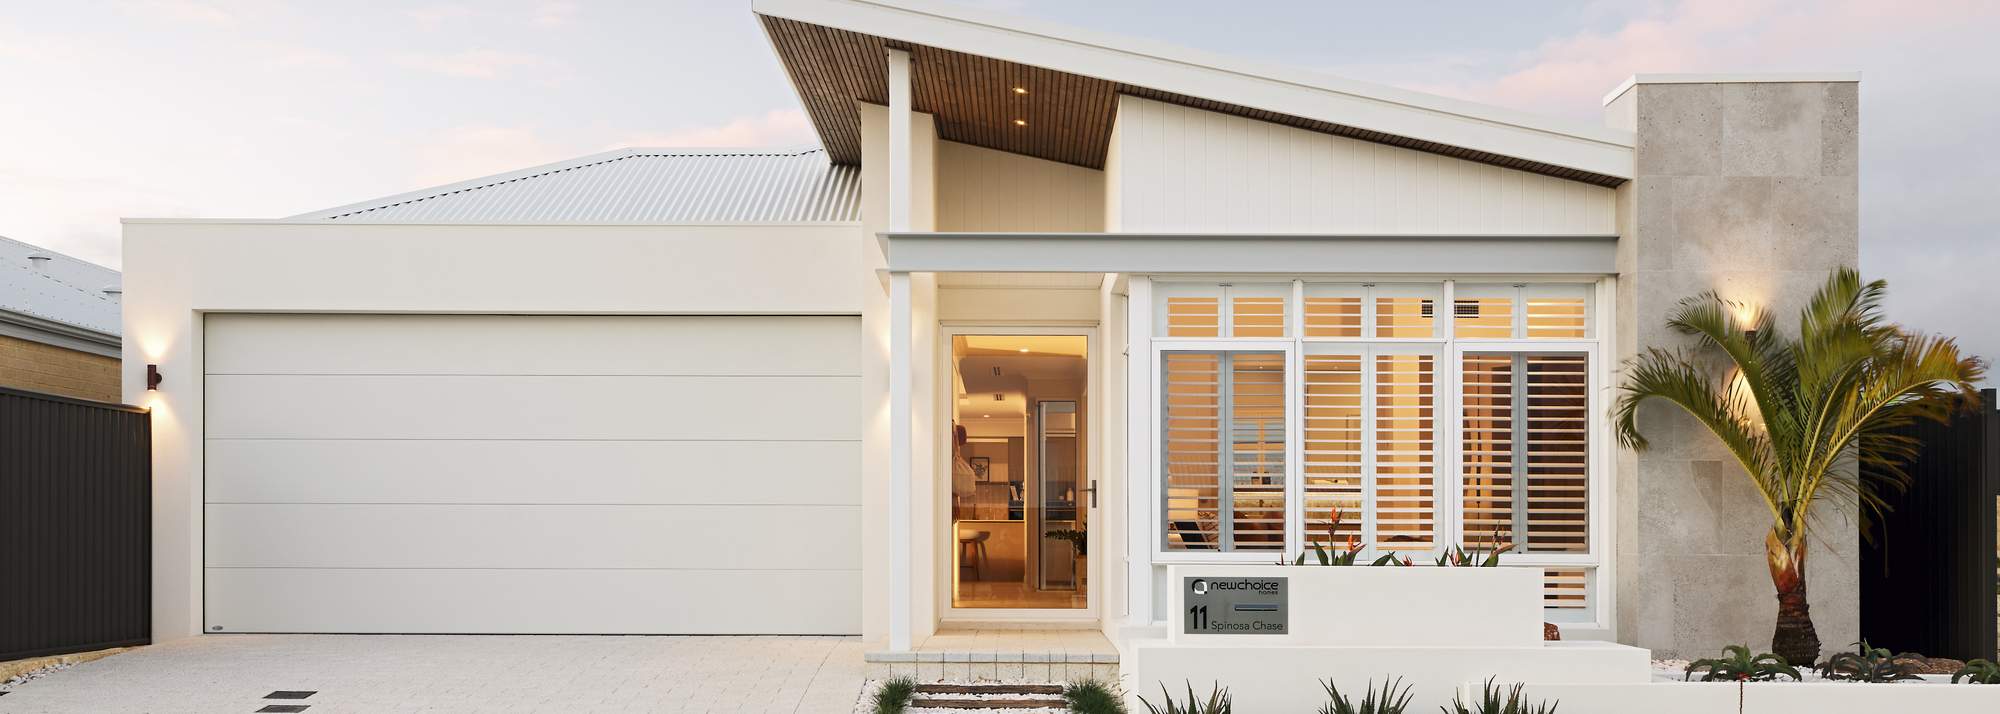 Eden Beach, Jindalee, New Choice Homes The Sanctuary